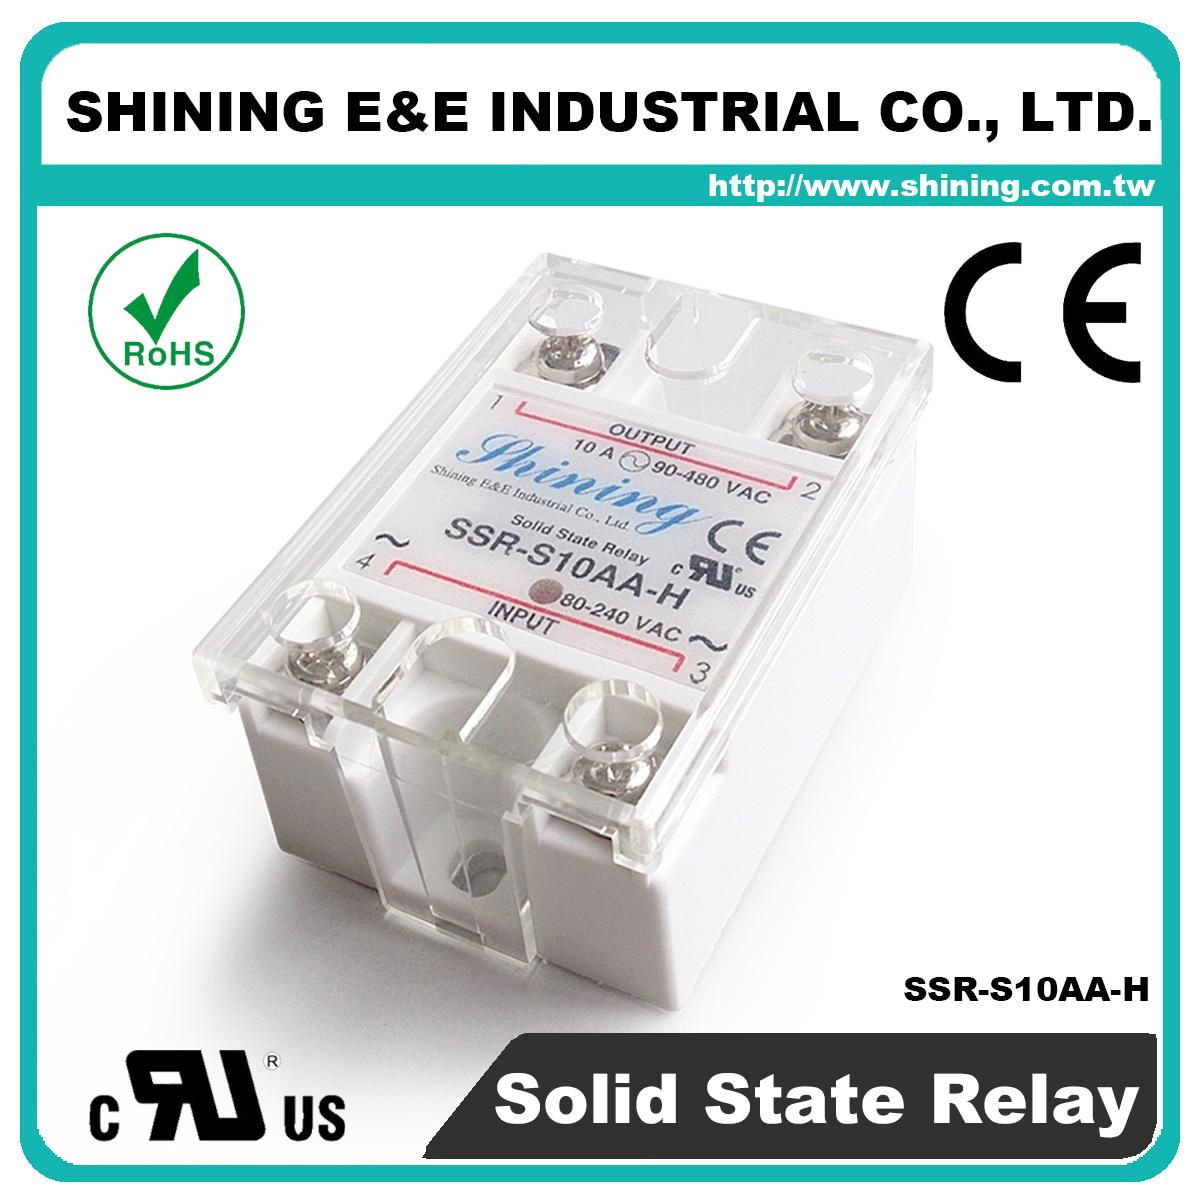 SSR-S10AA-H Single Phase 10Amp AC to AC Solid State Relay ( SSR ) 4